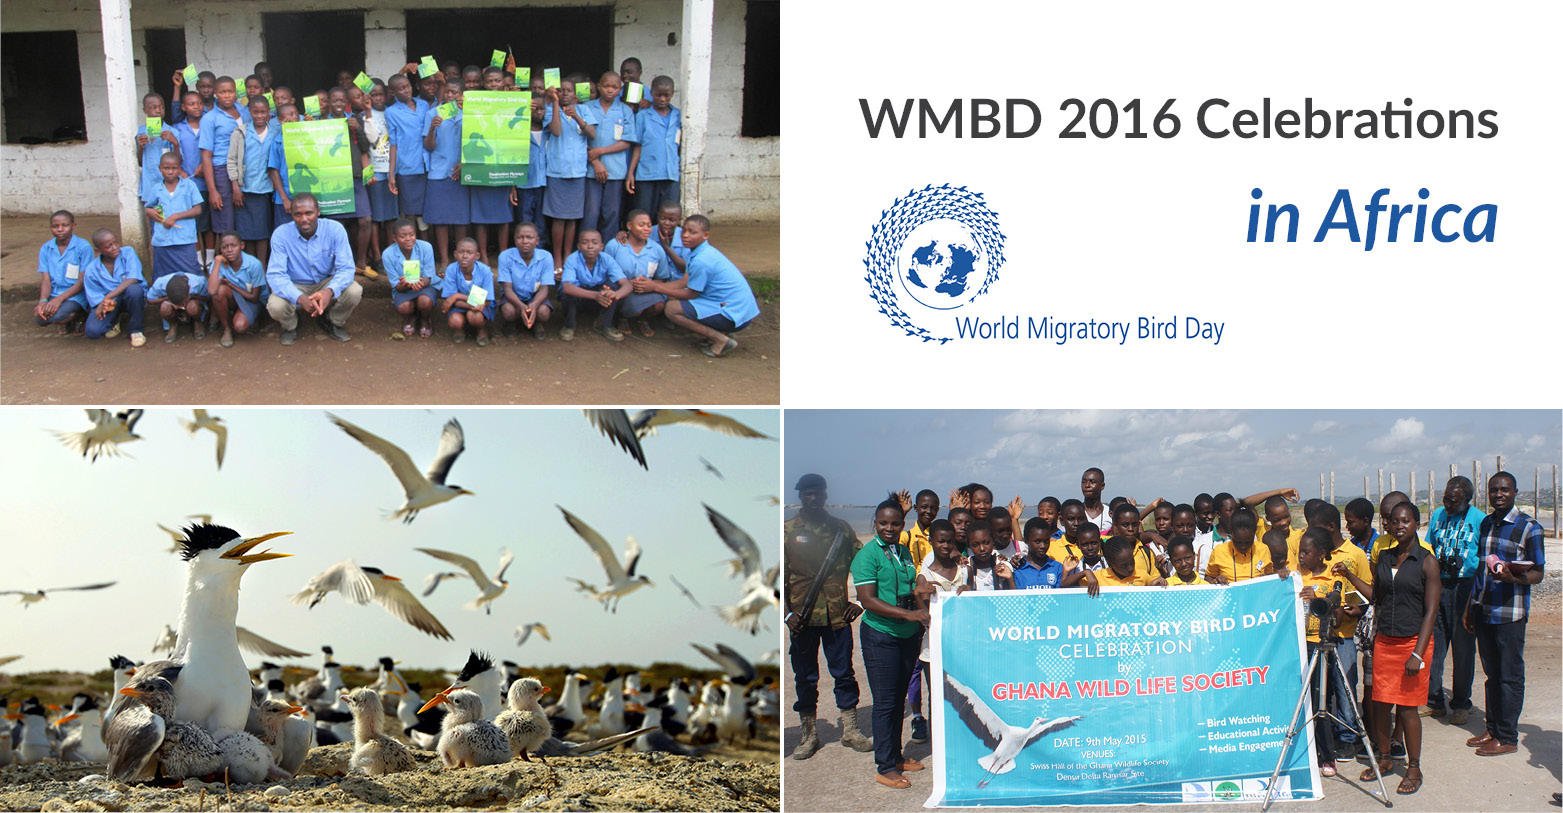 WMBD 2016 celebrations in Africa